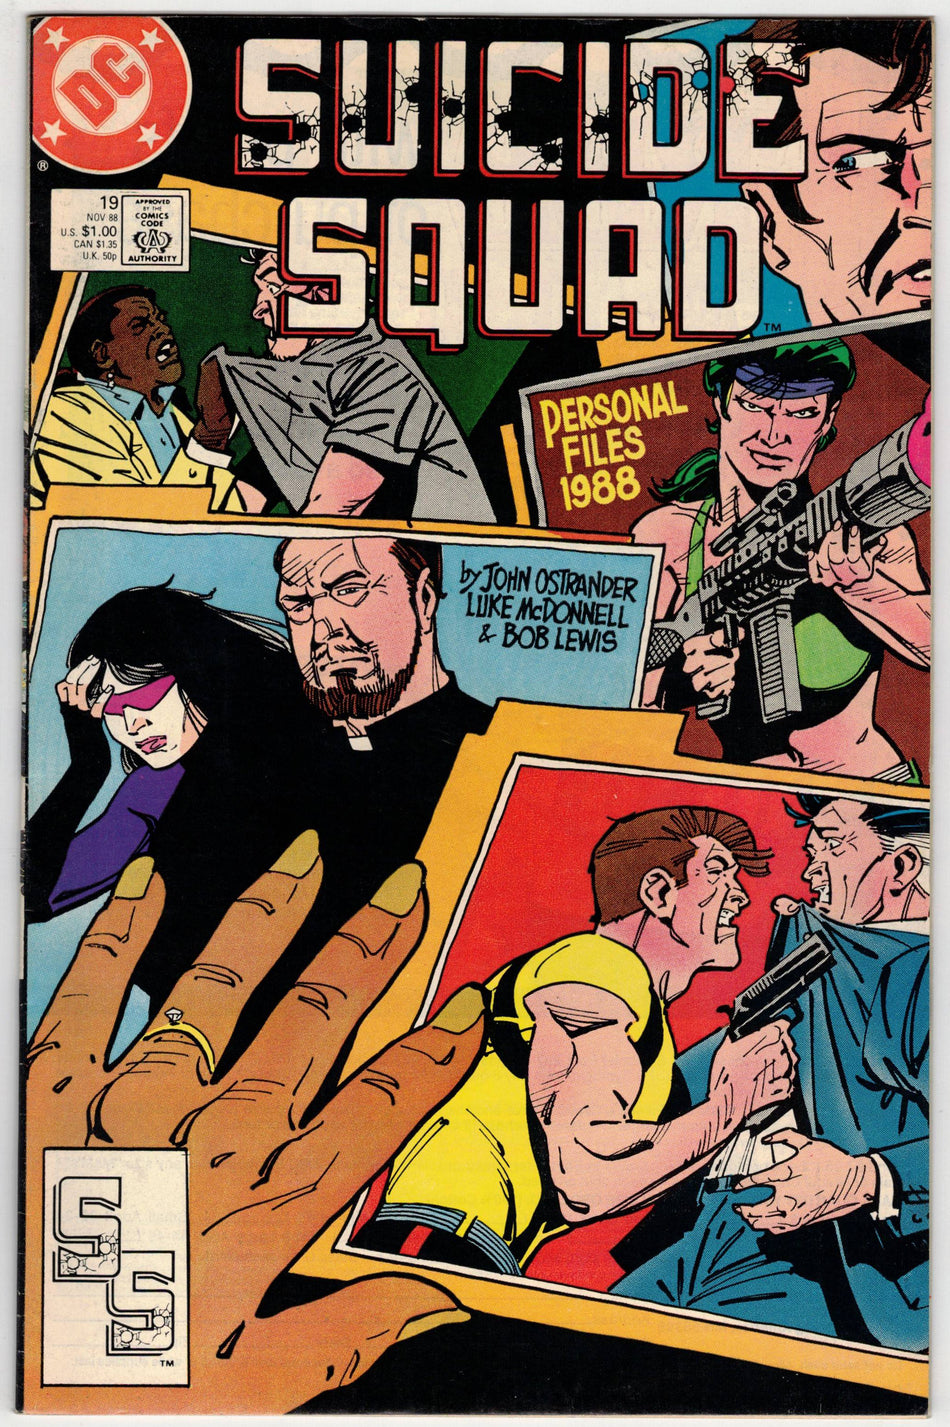 Photo of Suicide Squad, Vol. 1 (1988)  Issue 19  Comic sold by Stronghold Collectibles